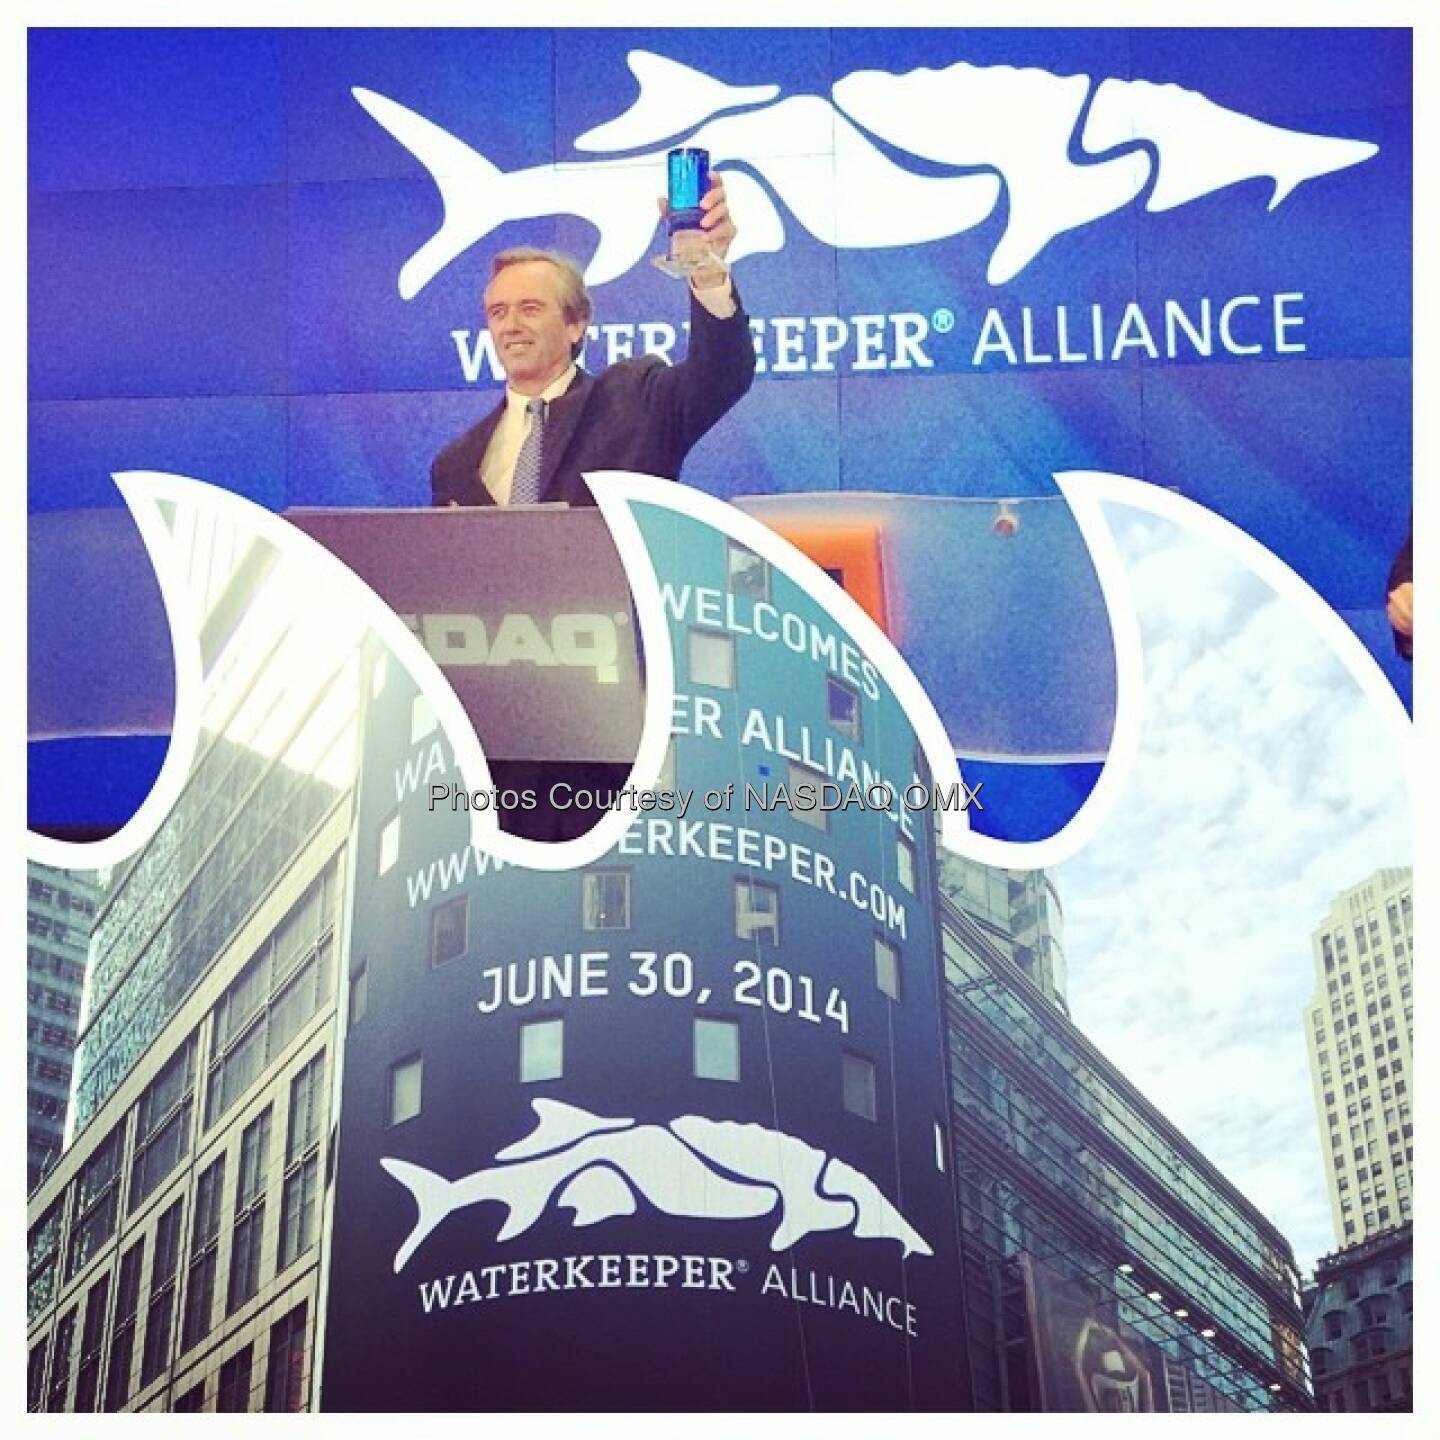 Great morning with Robert Kennedy Jr and the @waterkeeperalliance #diptic #sustainability #water  Source: http://facebook.com/NASDAQ